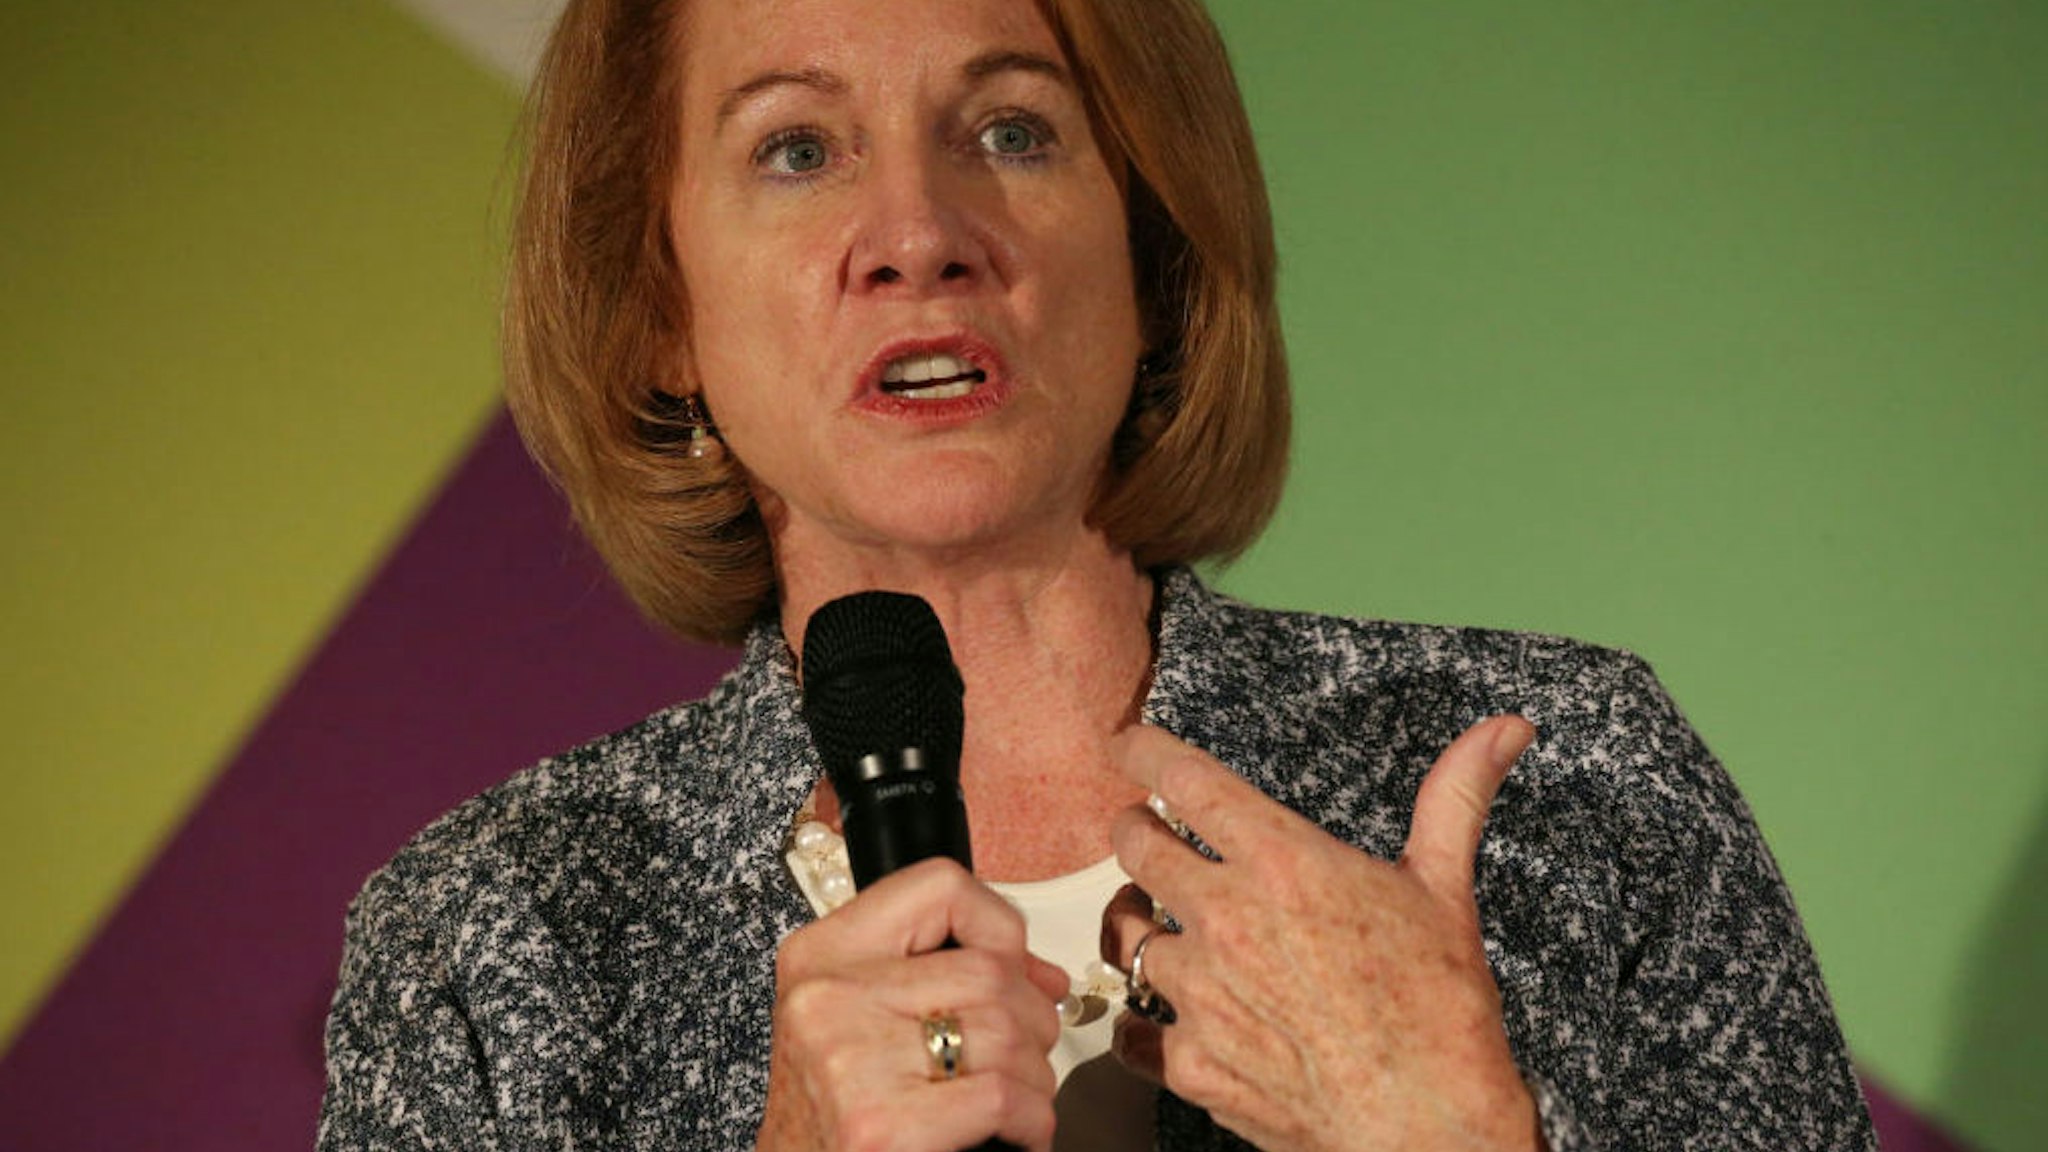 Seattle Mayor Jenny Durkan speaks during a Smarter Cities, Smarter Skills panel discussion at the Wayfair headquarters in Boston on June 8, 2018.